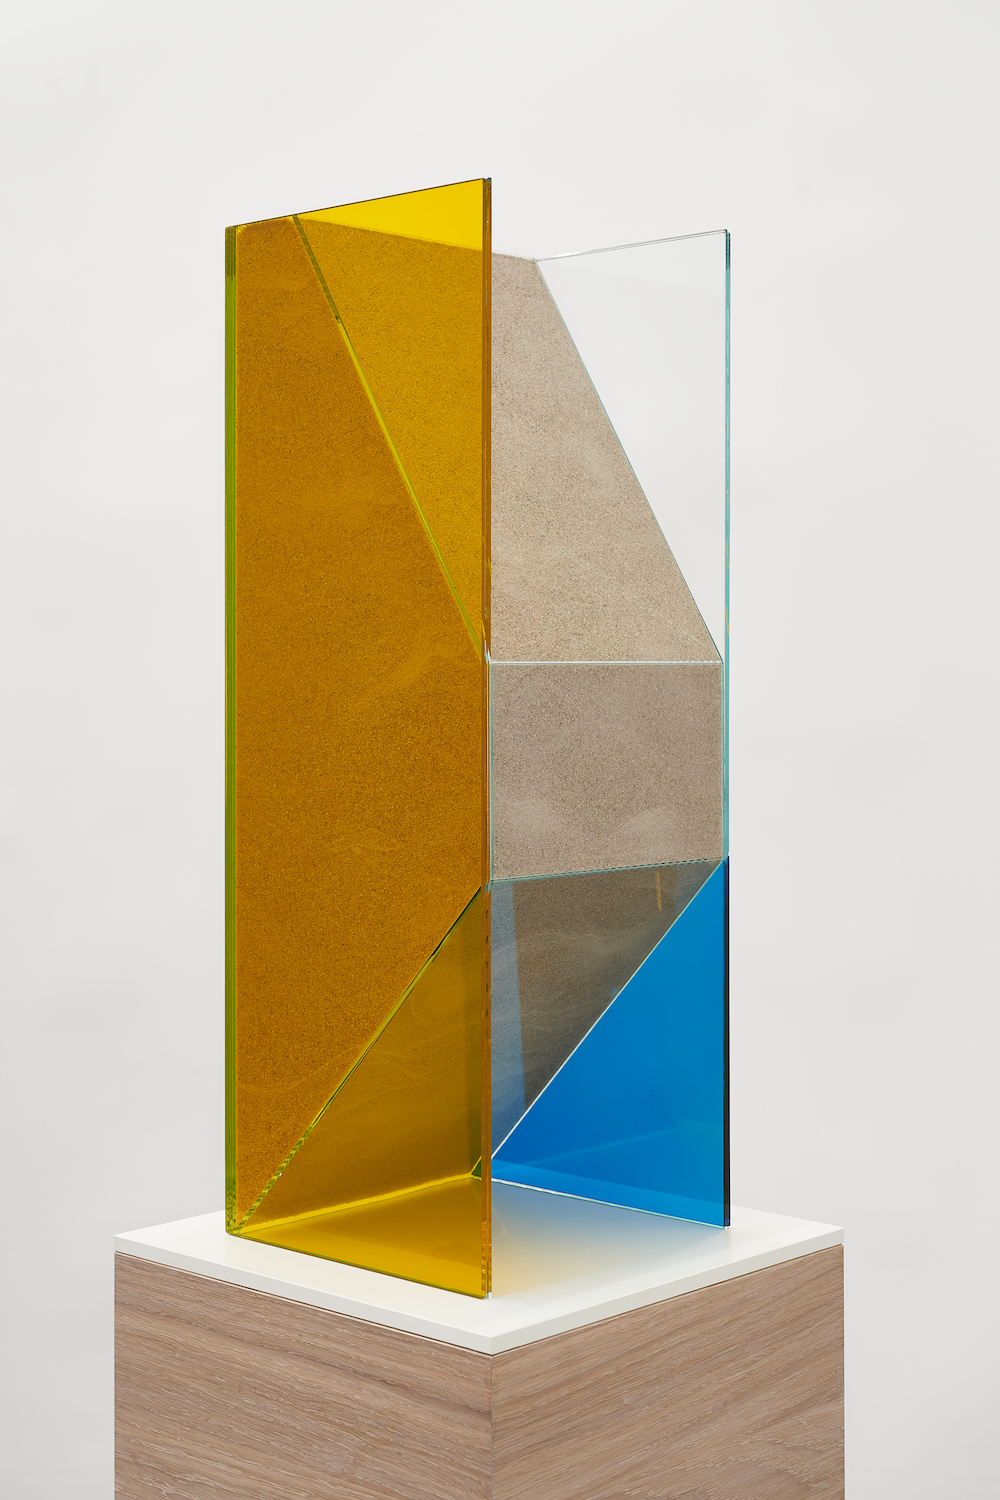 <p>TANJA WAGNER</p>
<p> </p>
<div>
<p class="Default">Kapwani Kiwanga, <span class="None">Shifting Sands (gold/blue)</span>, 2023. <span class="None">Courtesy of the artist and Galerie Tanja Wagner, Berlin</span></p>
</div>
